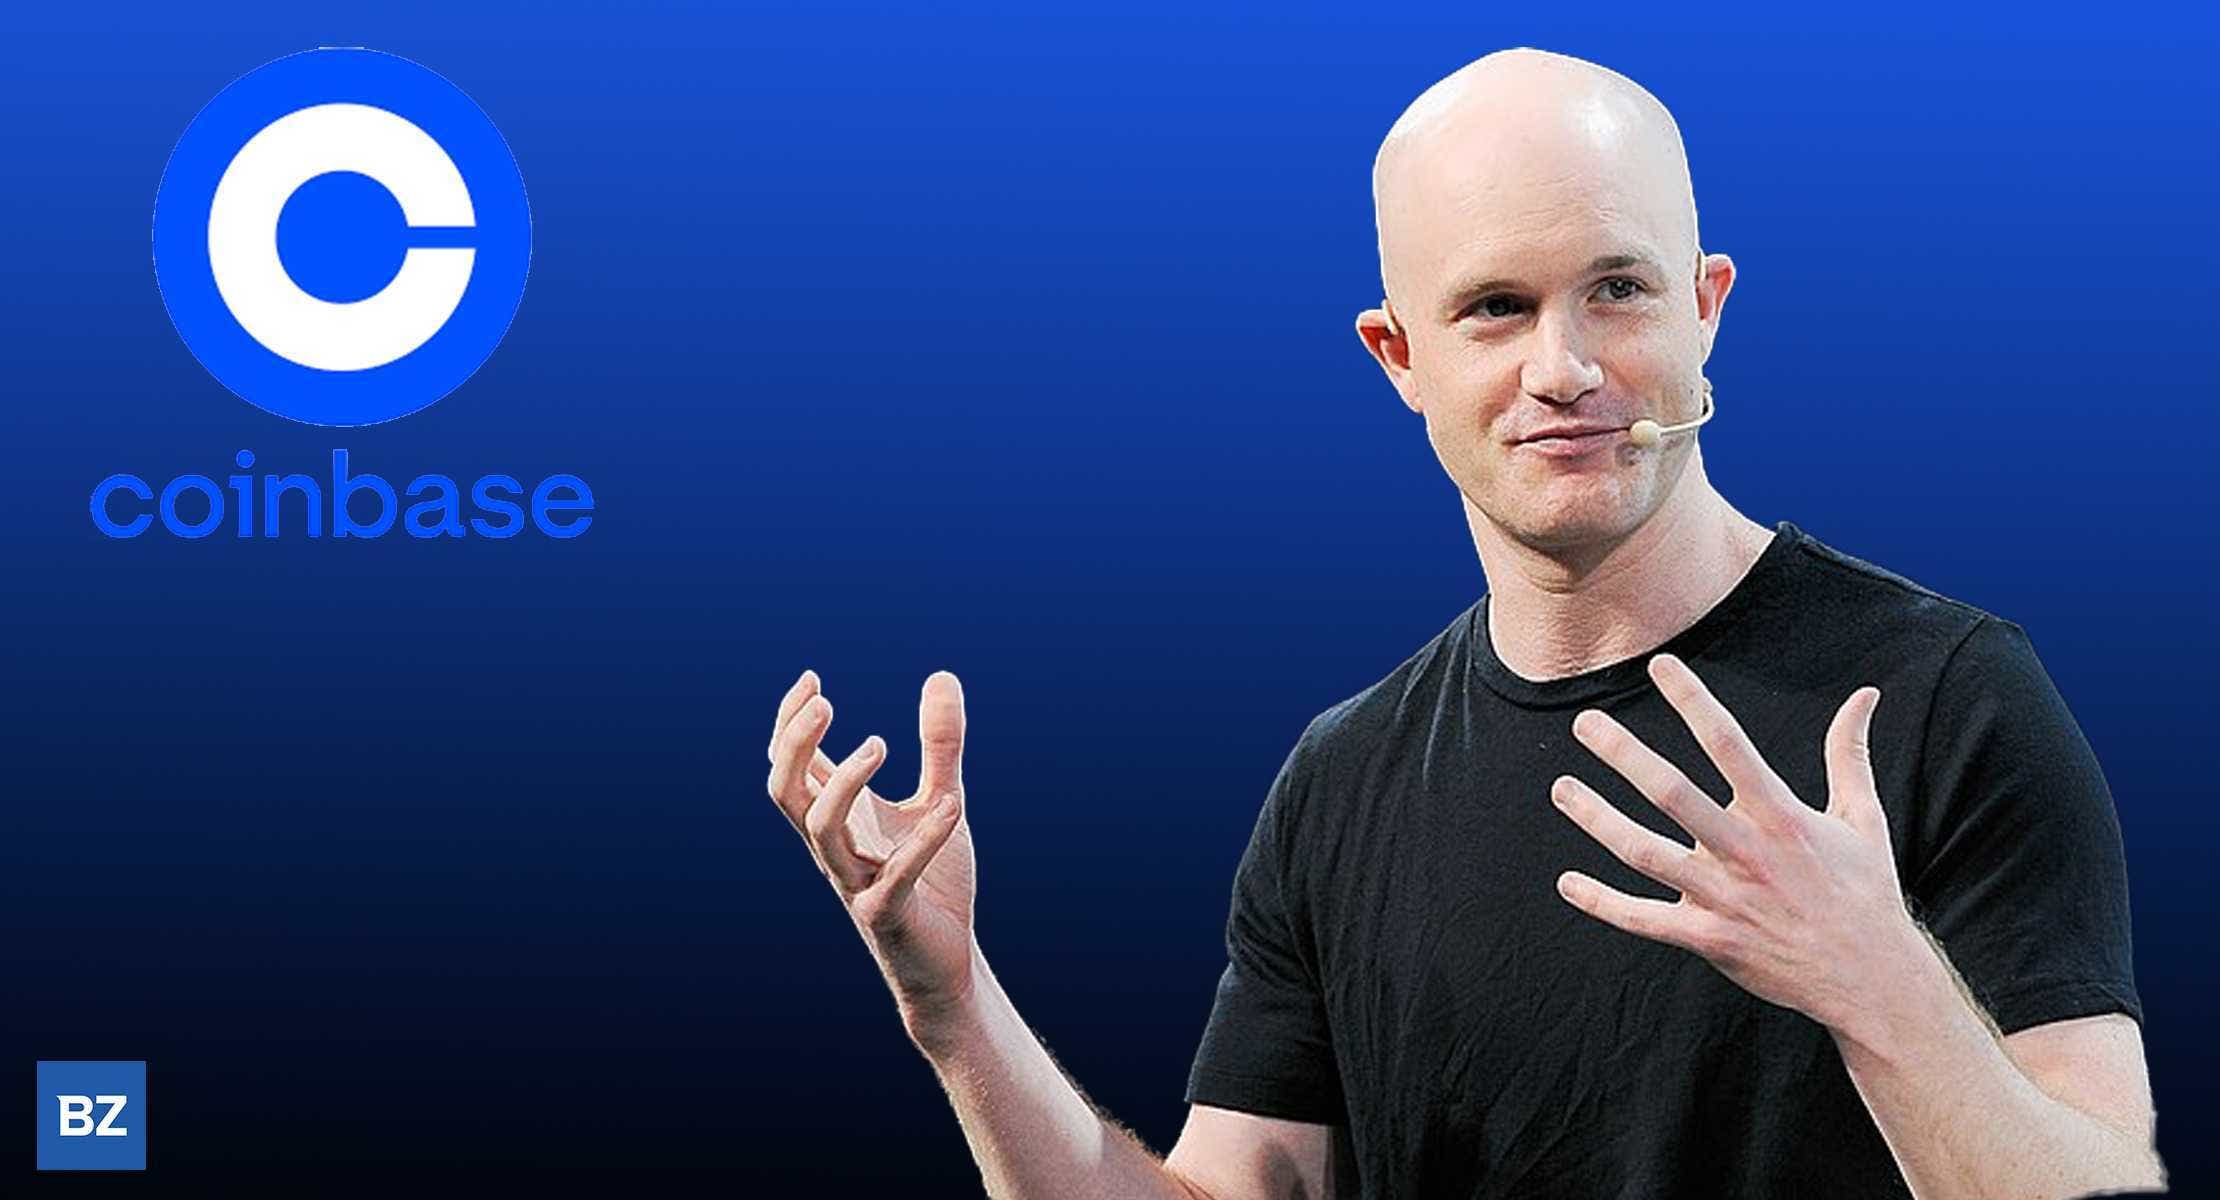 Coinbase Could Shut Down Ethereum Staking Due To Regulatory Risks, CEO Says